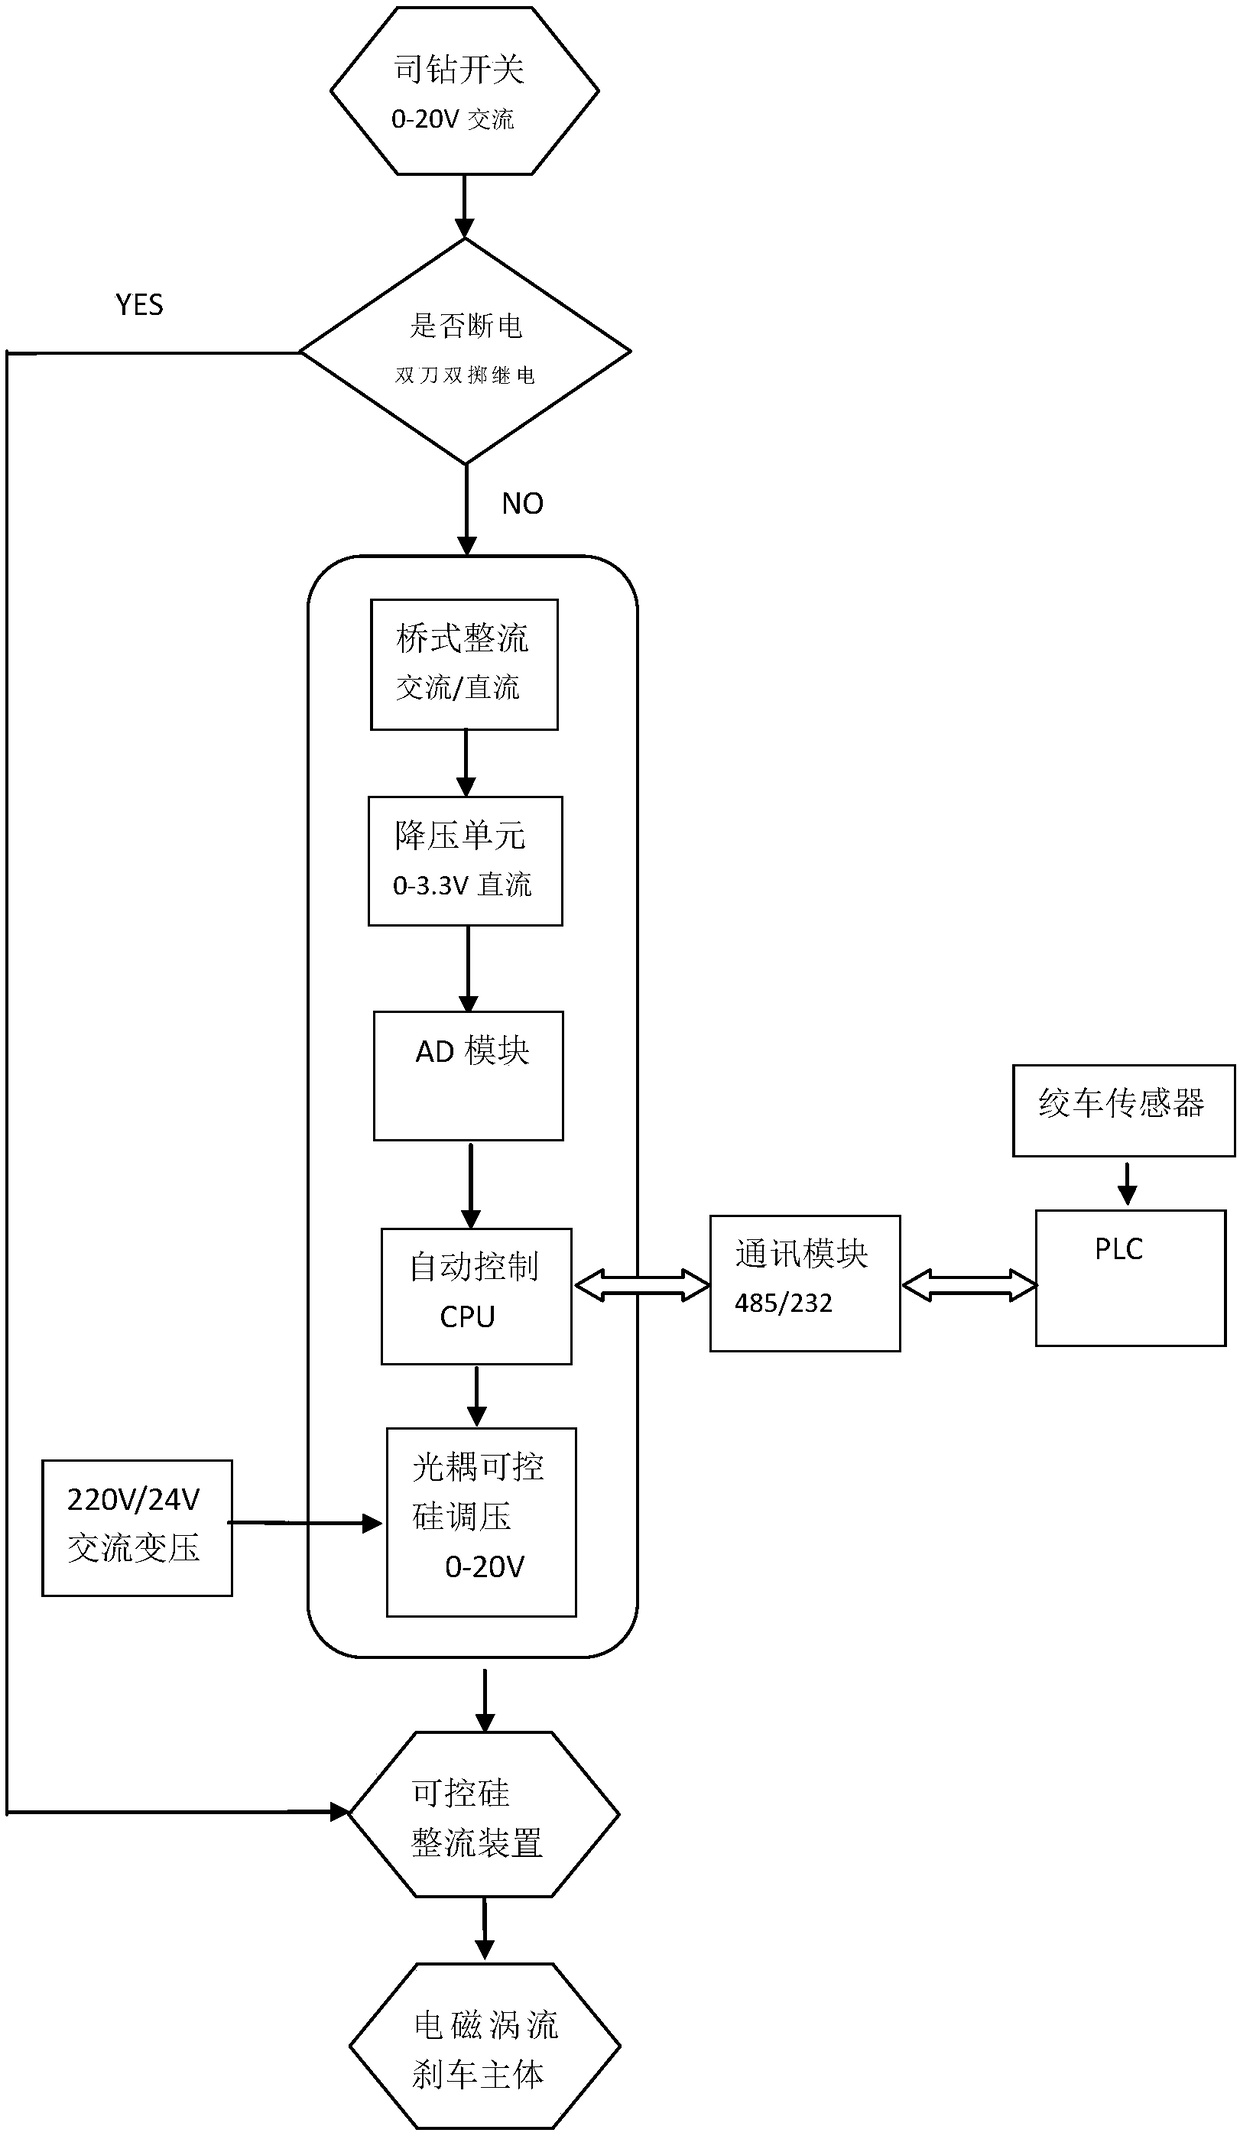 Control method and system for preventing out-of-control of oil drilling engineering drilling rig/traveling block